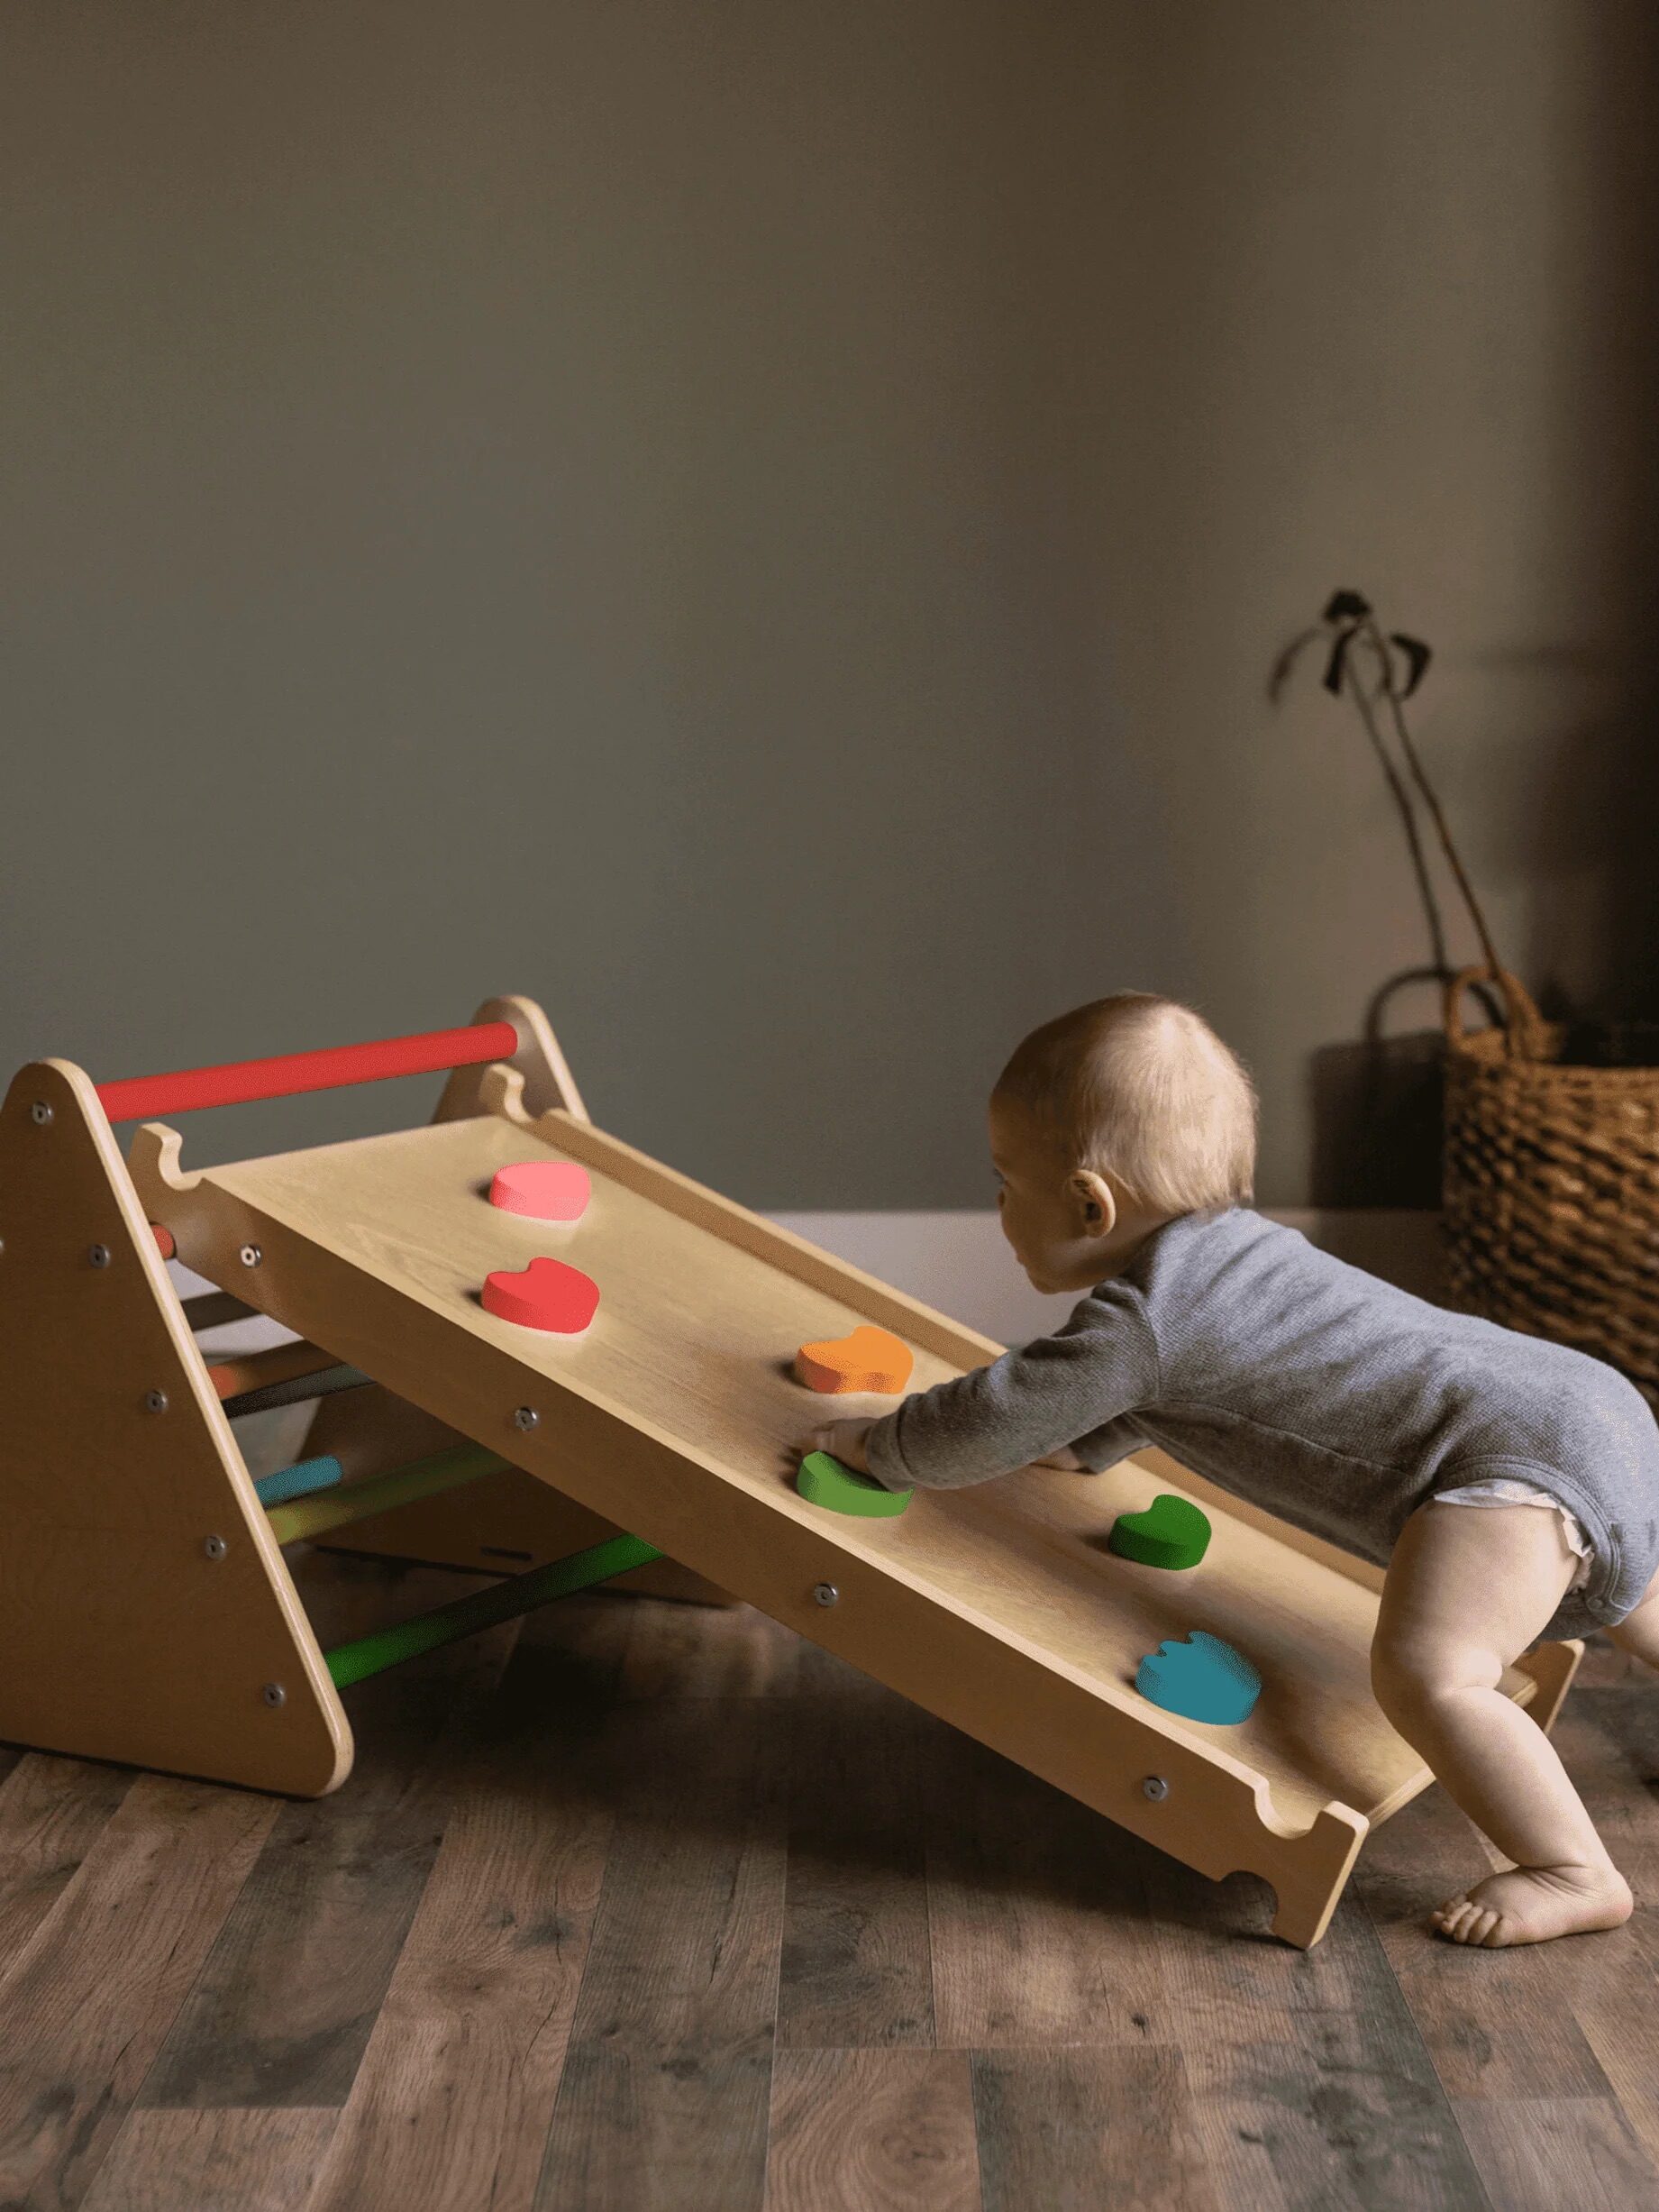 A baby in a grey outfit is playing with a wooden climbing ramp with multi-colored holds indoors on a wooden floor.